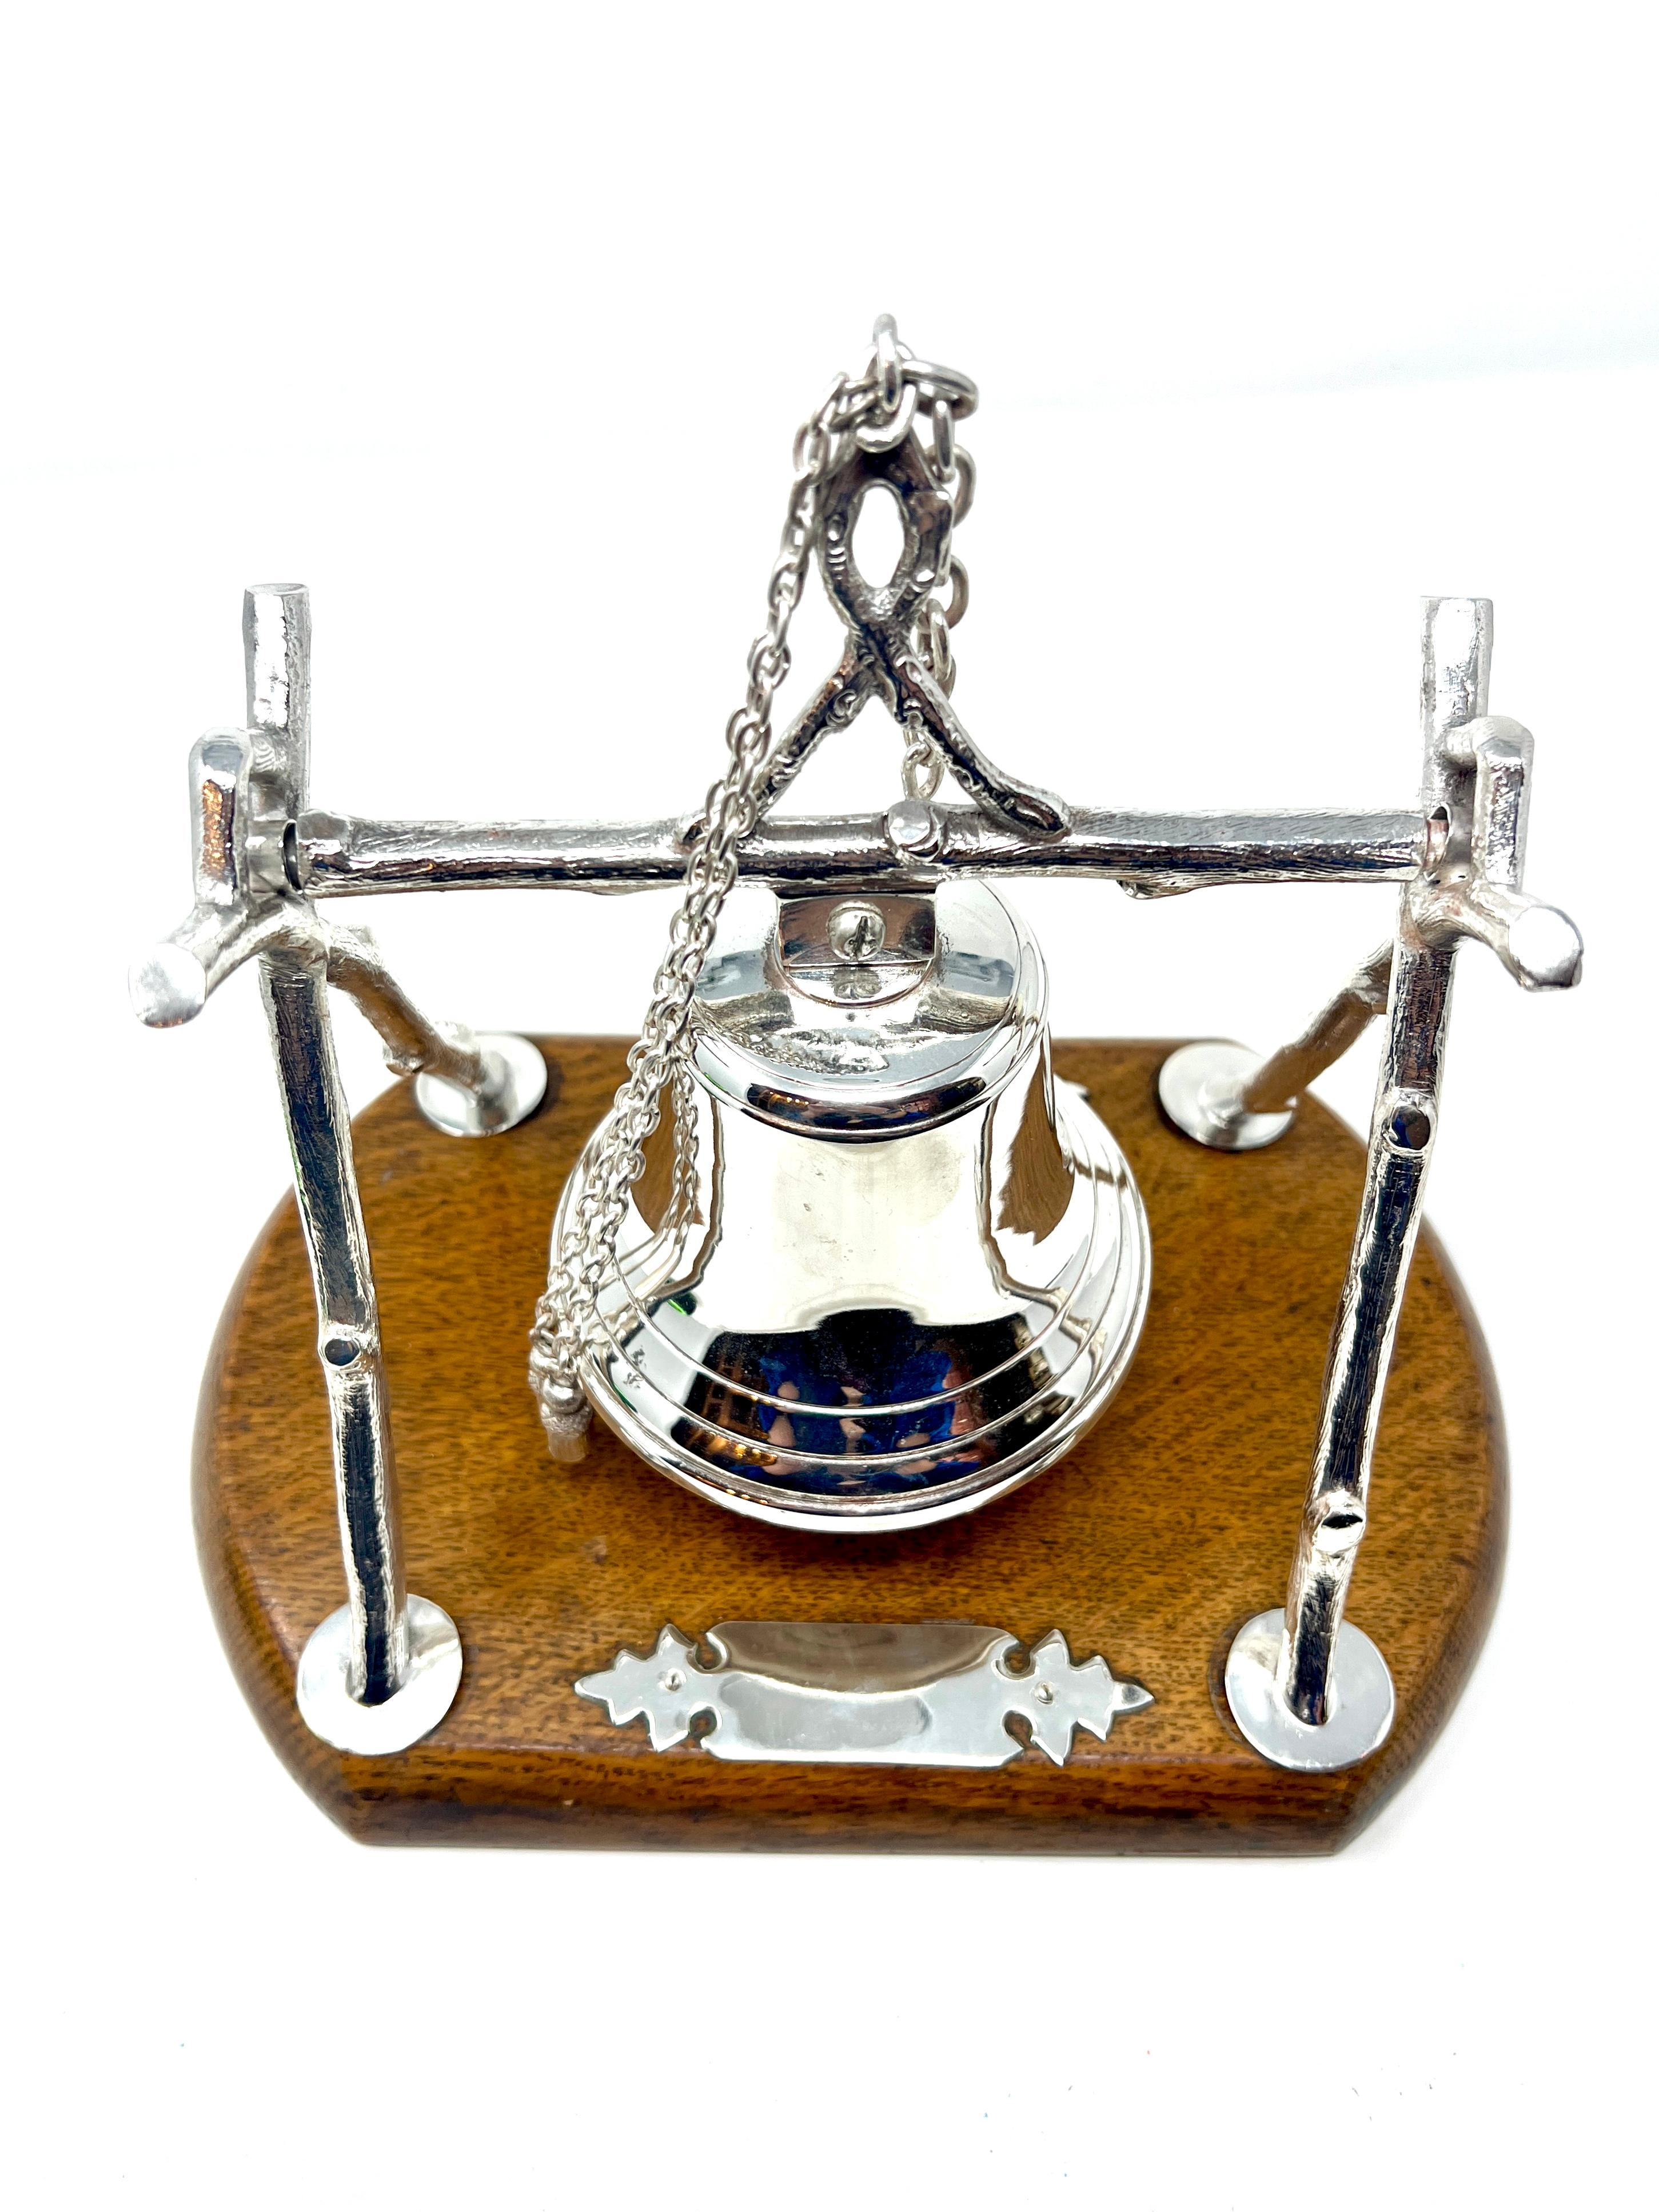 Antique English Silver Plated Dinner Bell Mounted on an Oak Base, Circa 1890-1900.